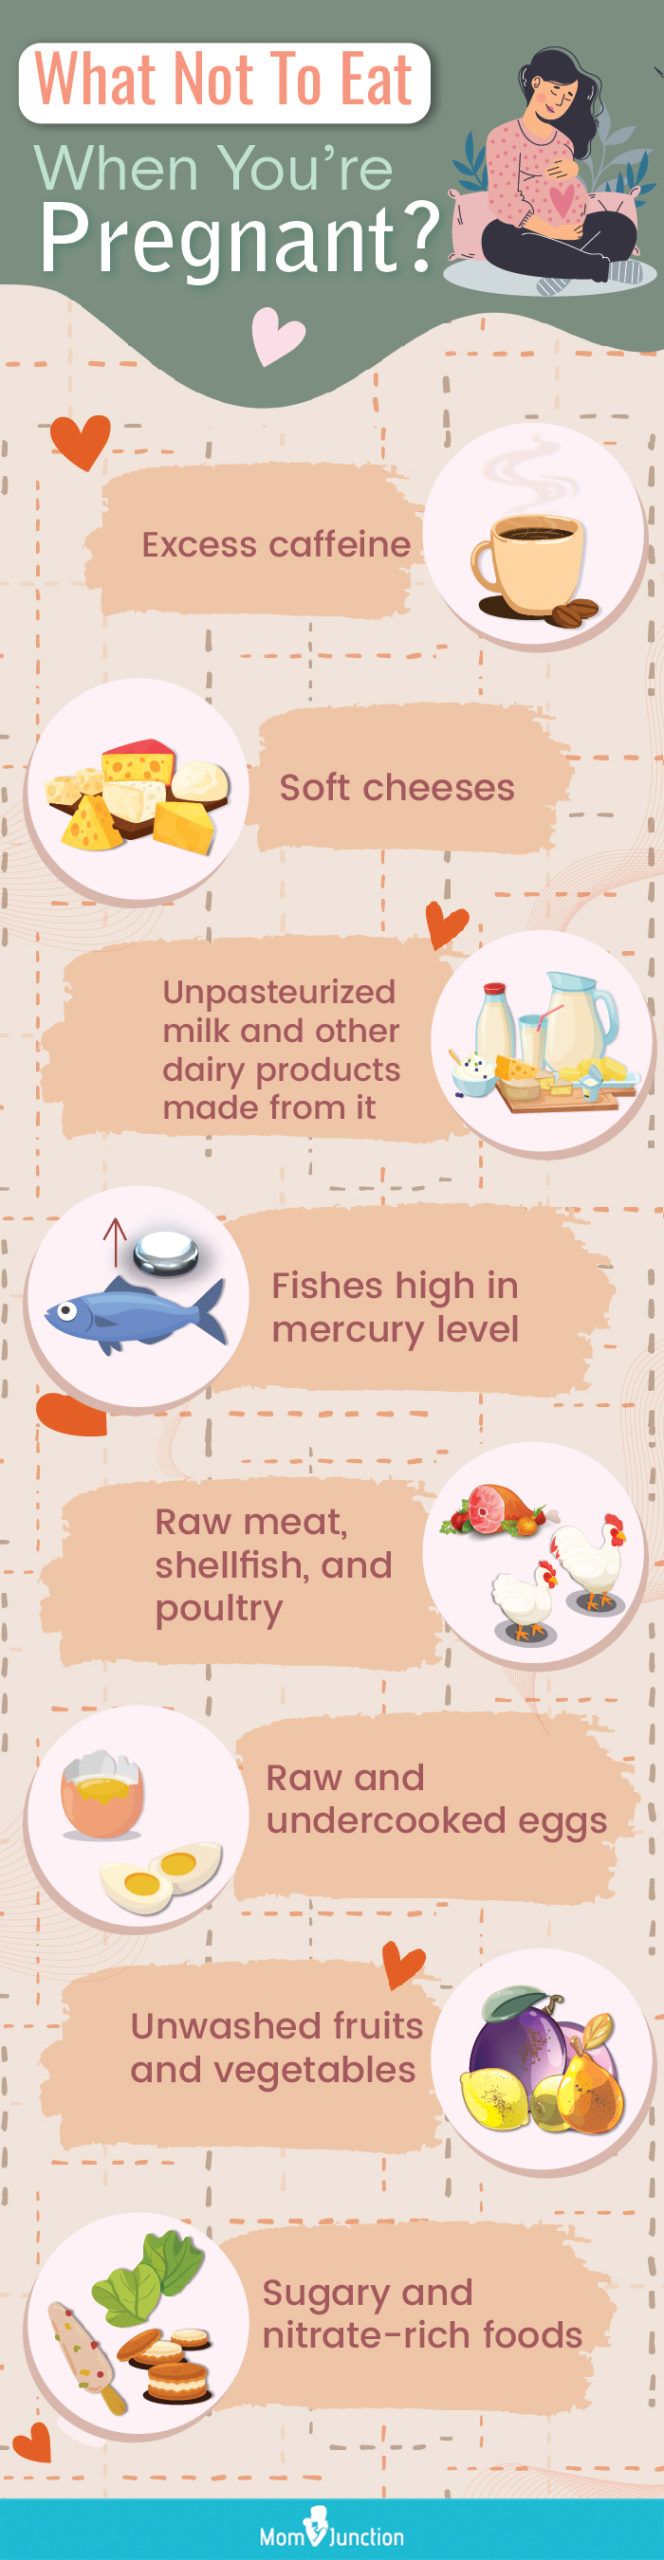 foods to avoid when pregnant (infographic)